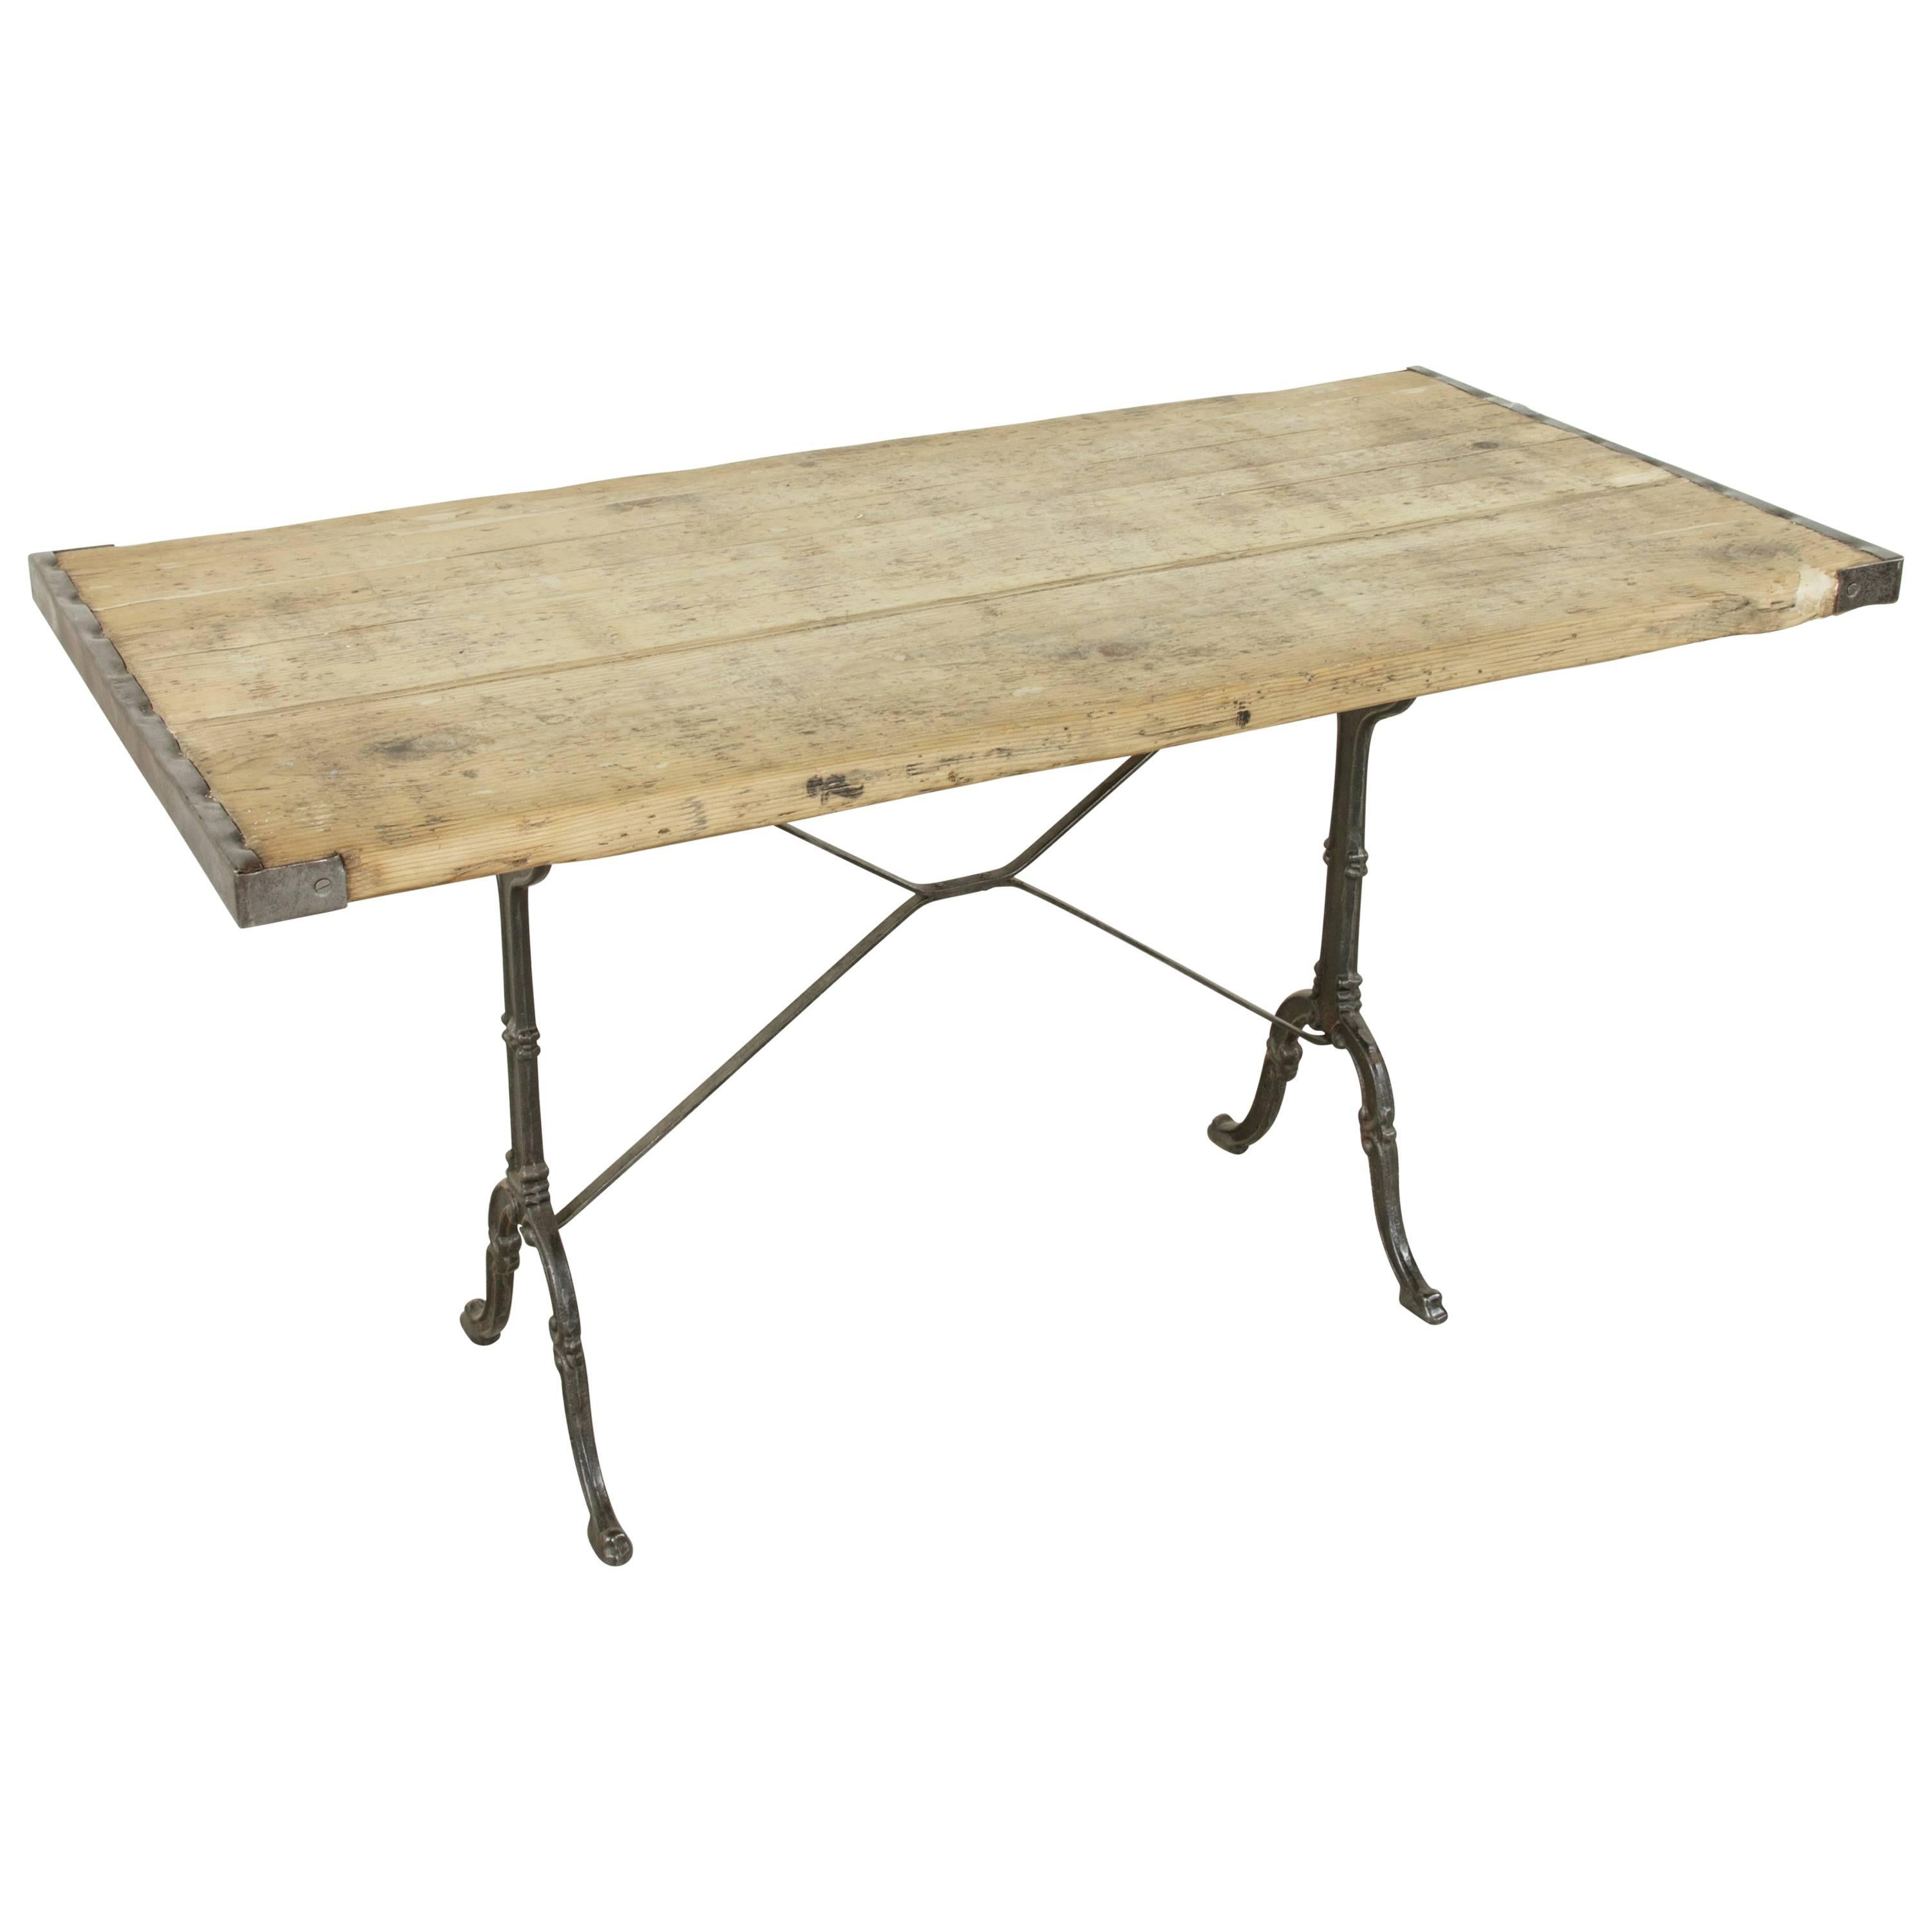 Early 20th Century French Cast Iron Bistro Table Cafe Table with Rustic Pine Top